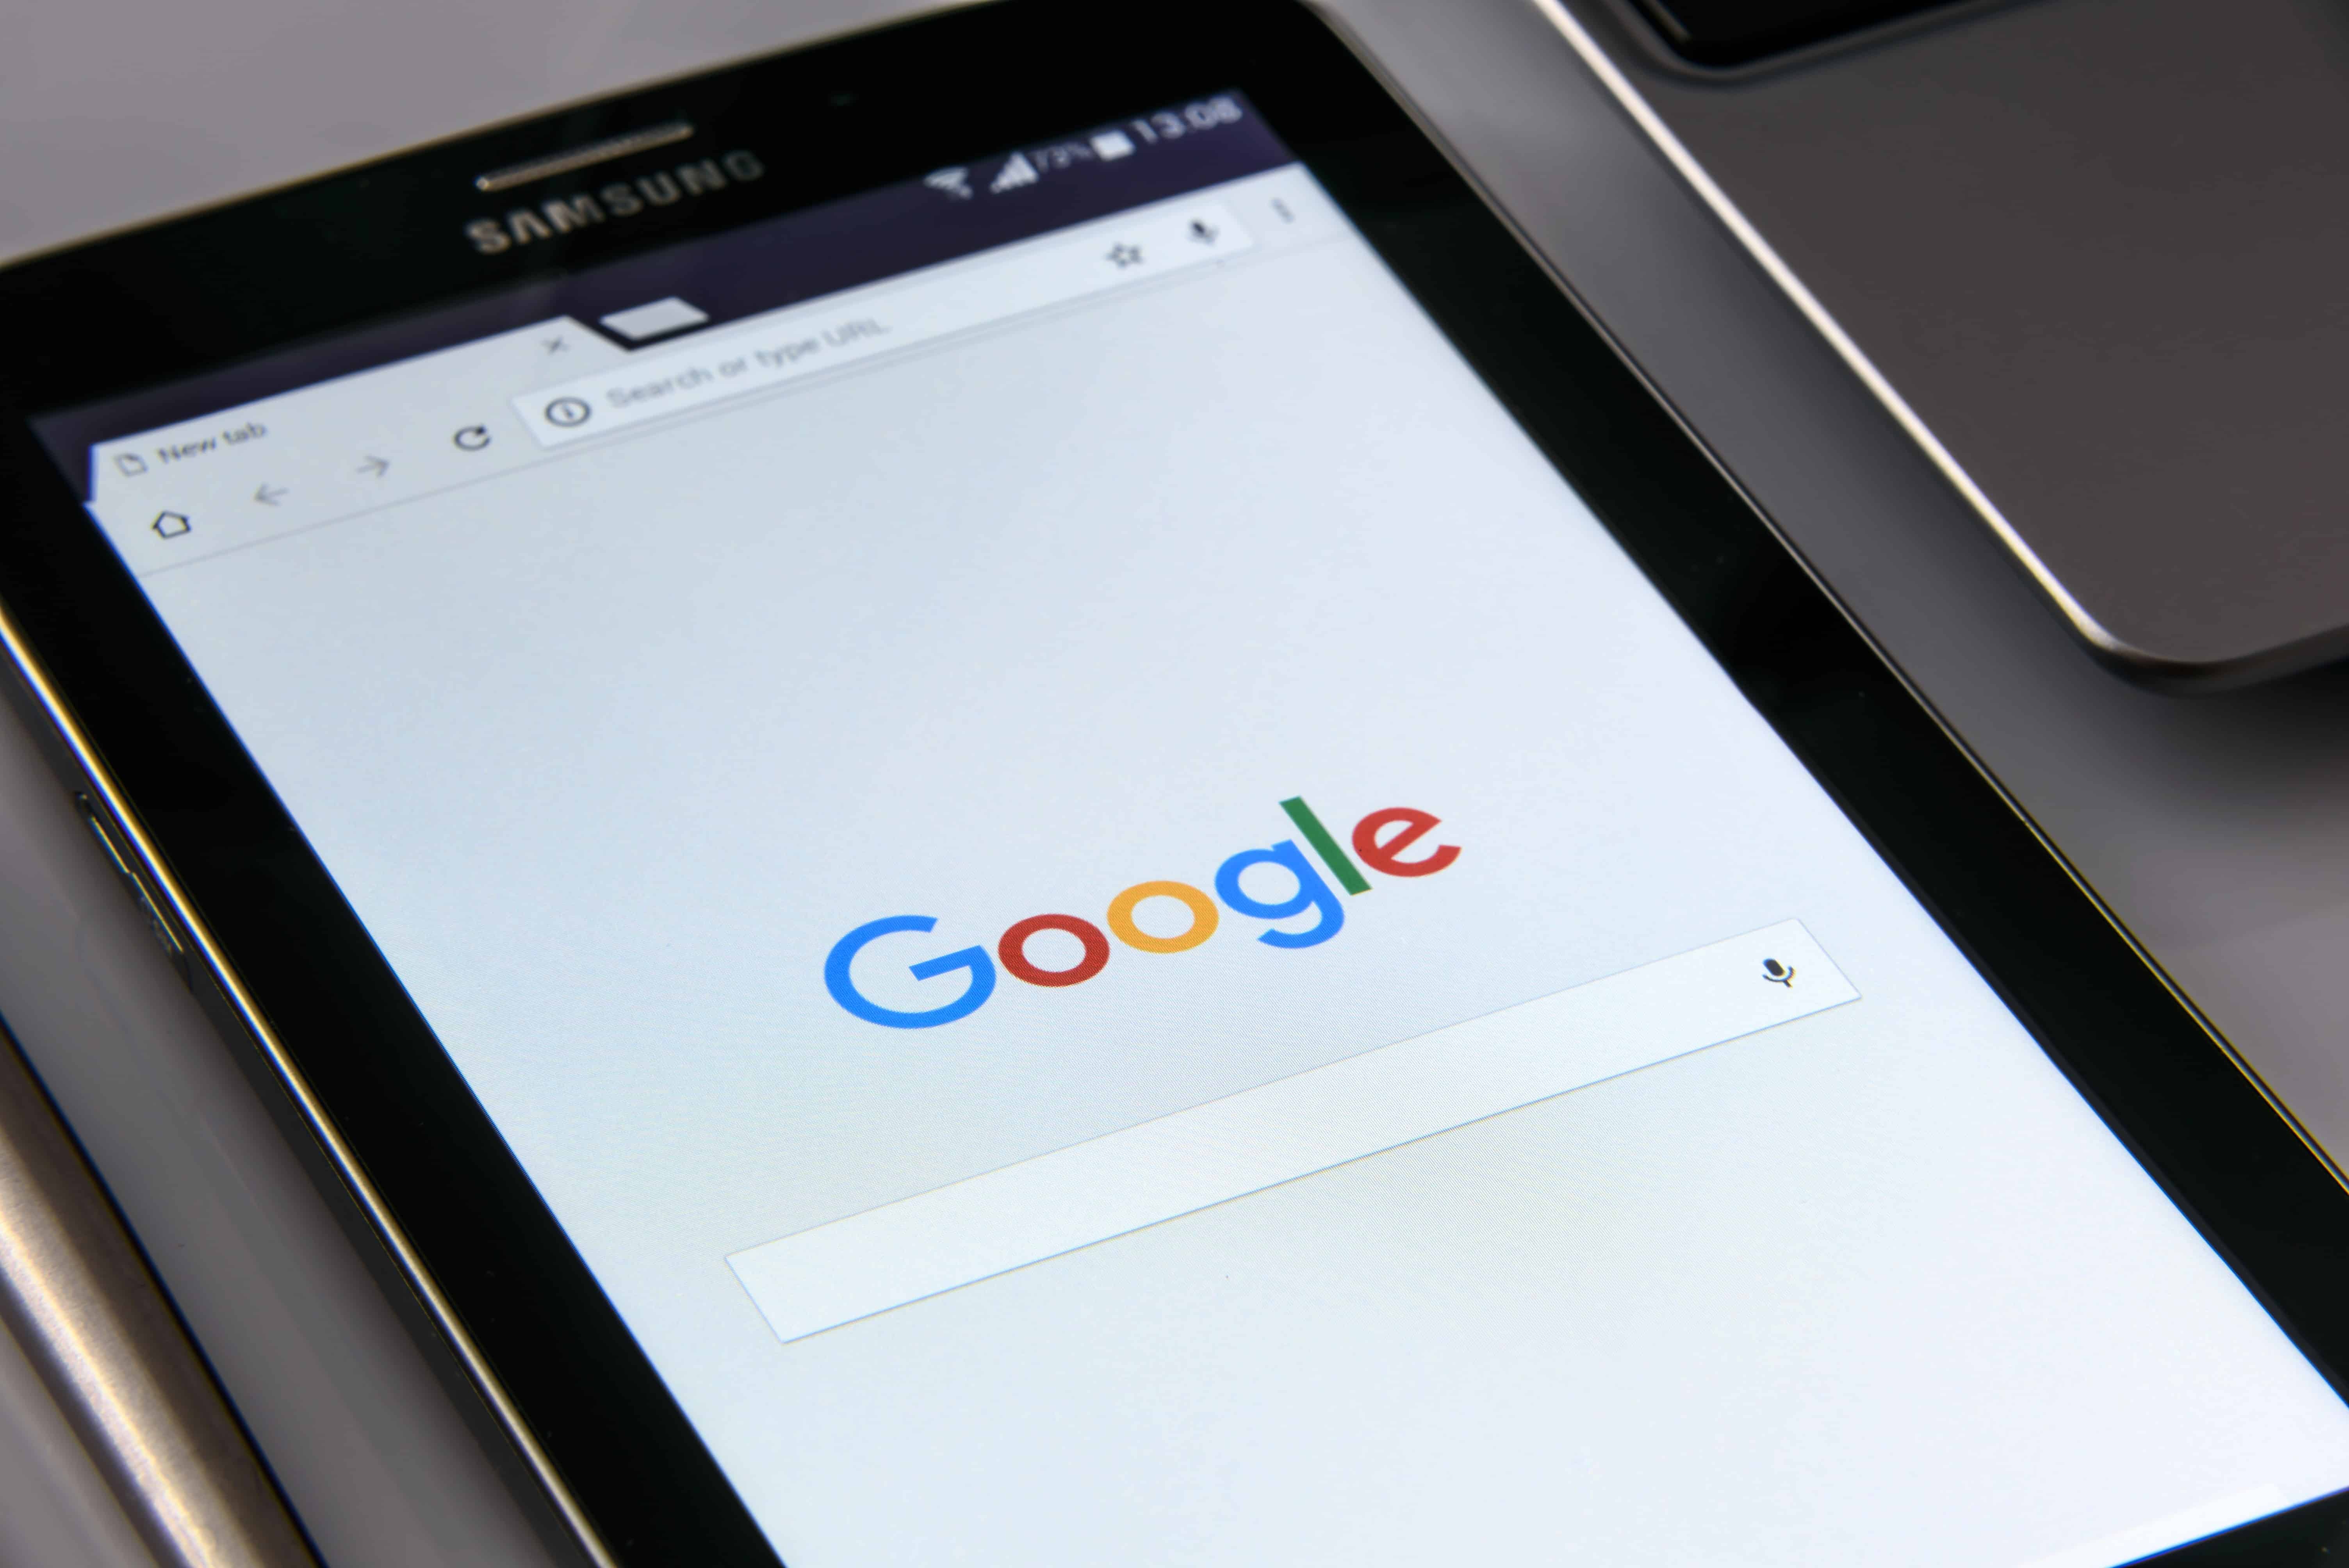 SEO Agency Tips: How to rank your business on Google in 2020?